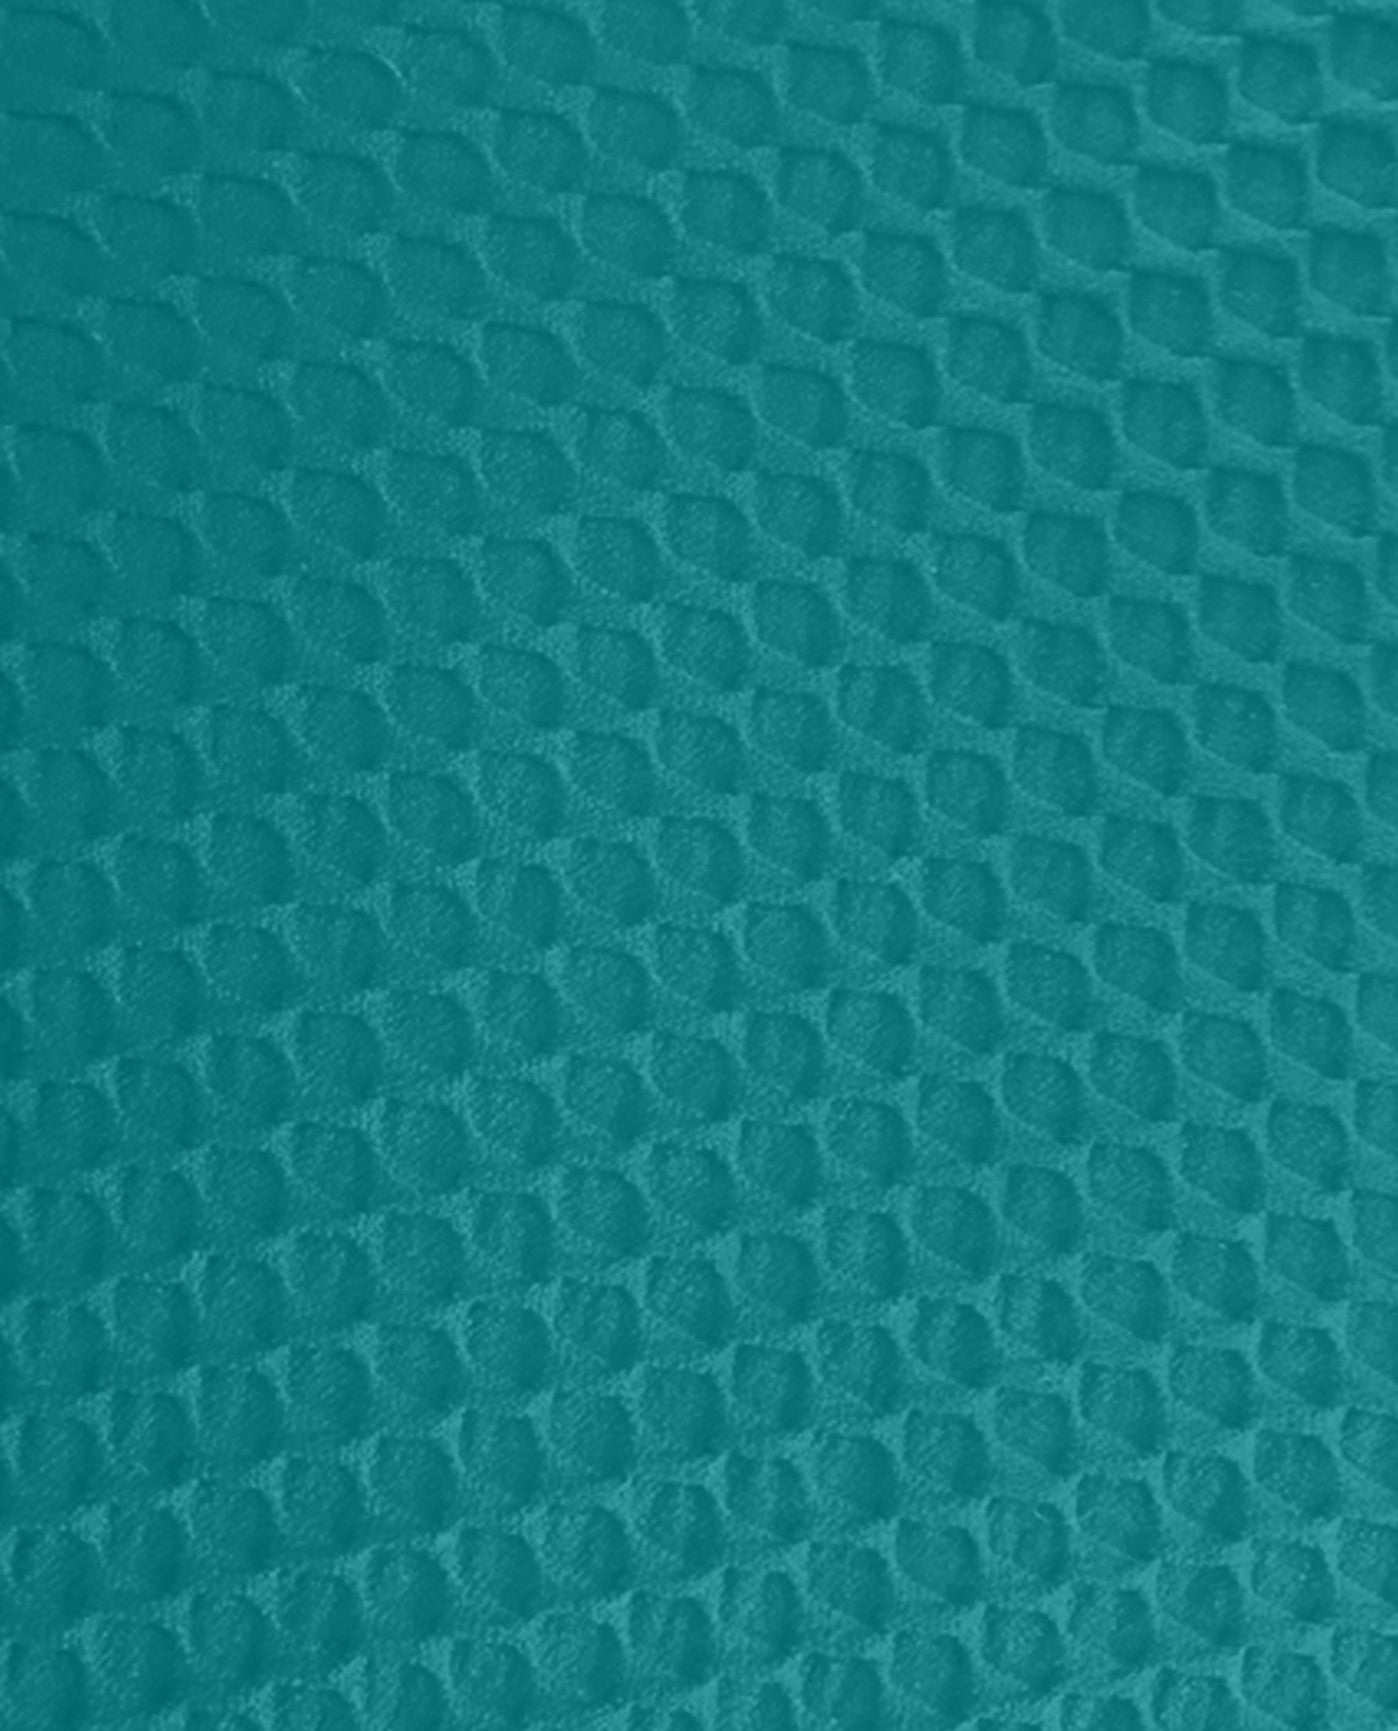 FABRIC SWATCH VIEW OF CHLORINE RESISTANT AQUAMORE SOLID TEXTURED SHIRRED FRONT PLUS SIZE SWIMSUIT | 506 AQT TEXTURED JADE